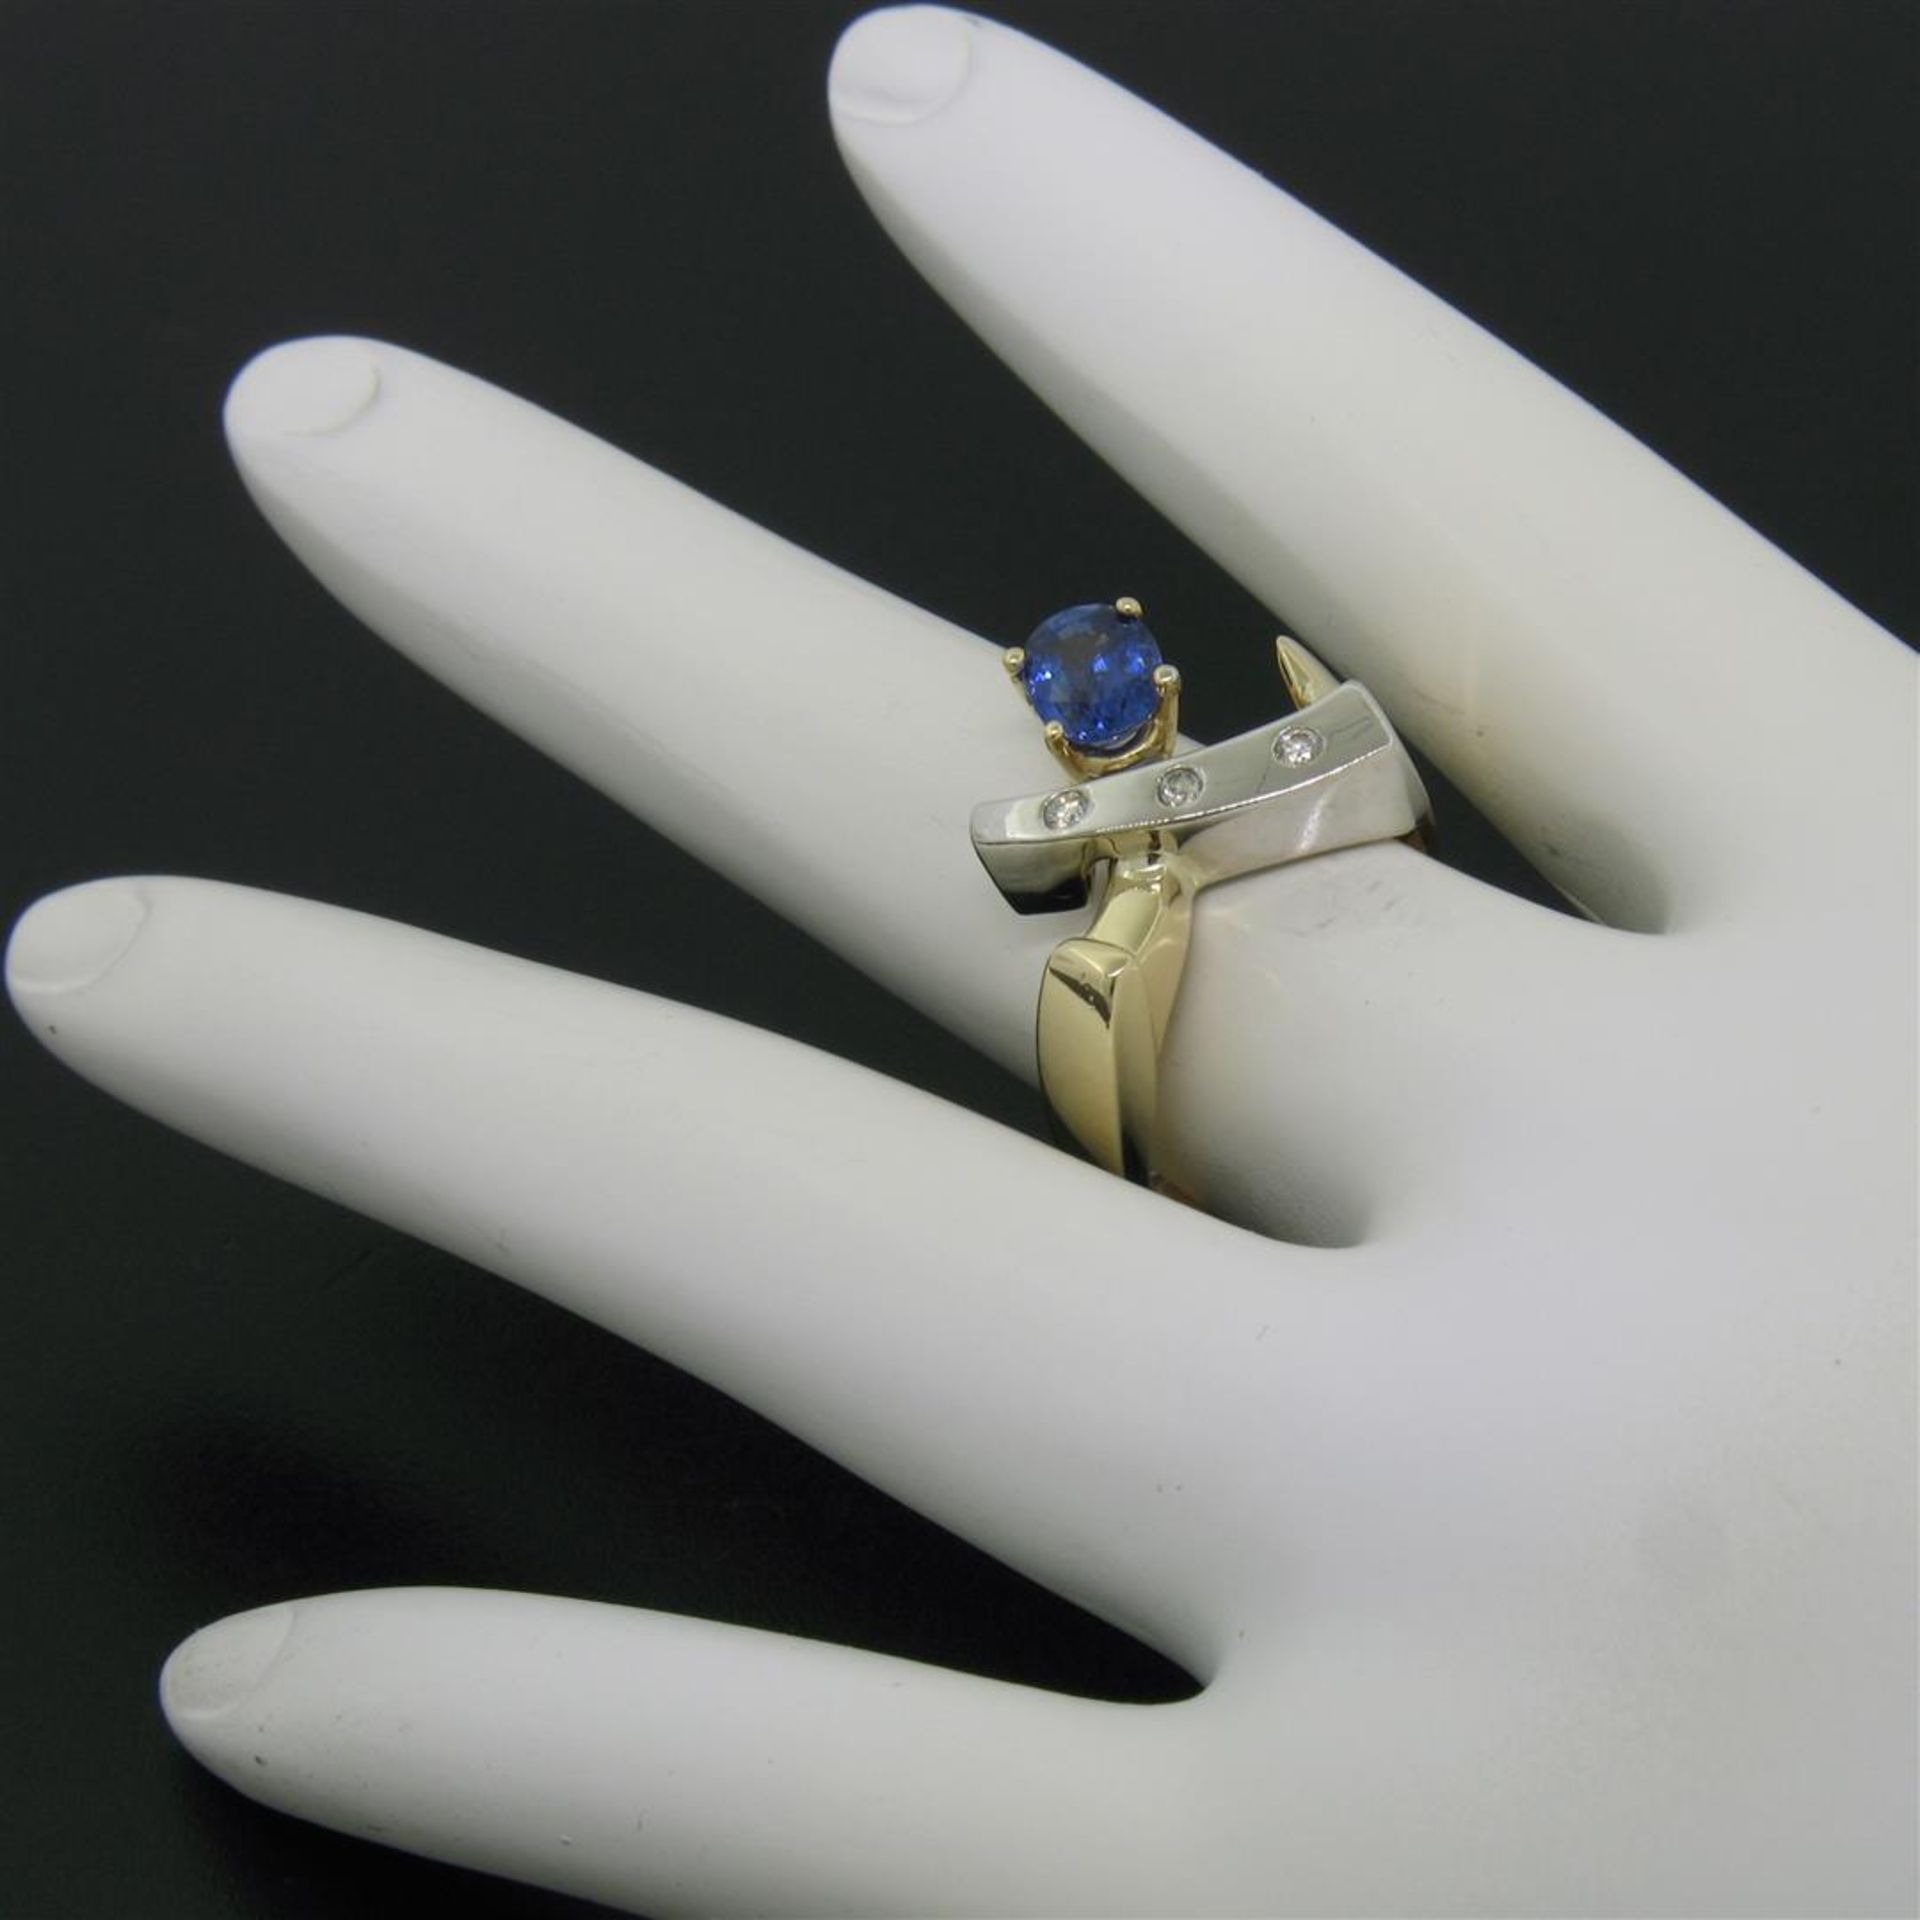 Two Tone 14K Gold 0.98ctw QUALITY Sapphire Solitaire Ring w/ 3 Diamond Accents - Image 6 of 7